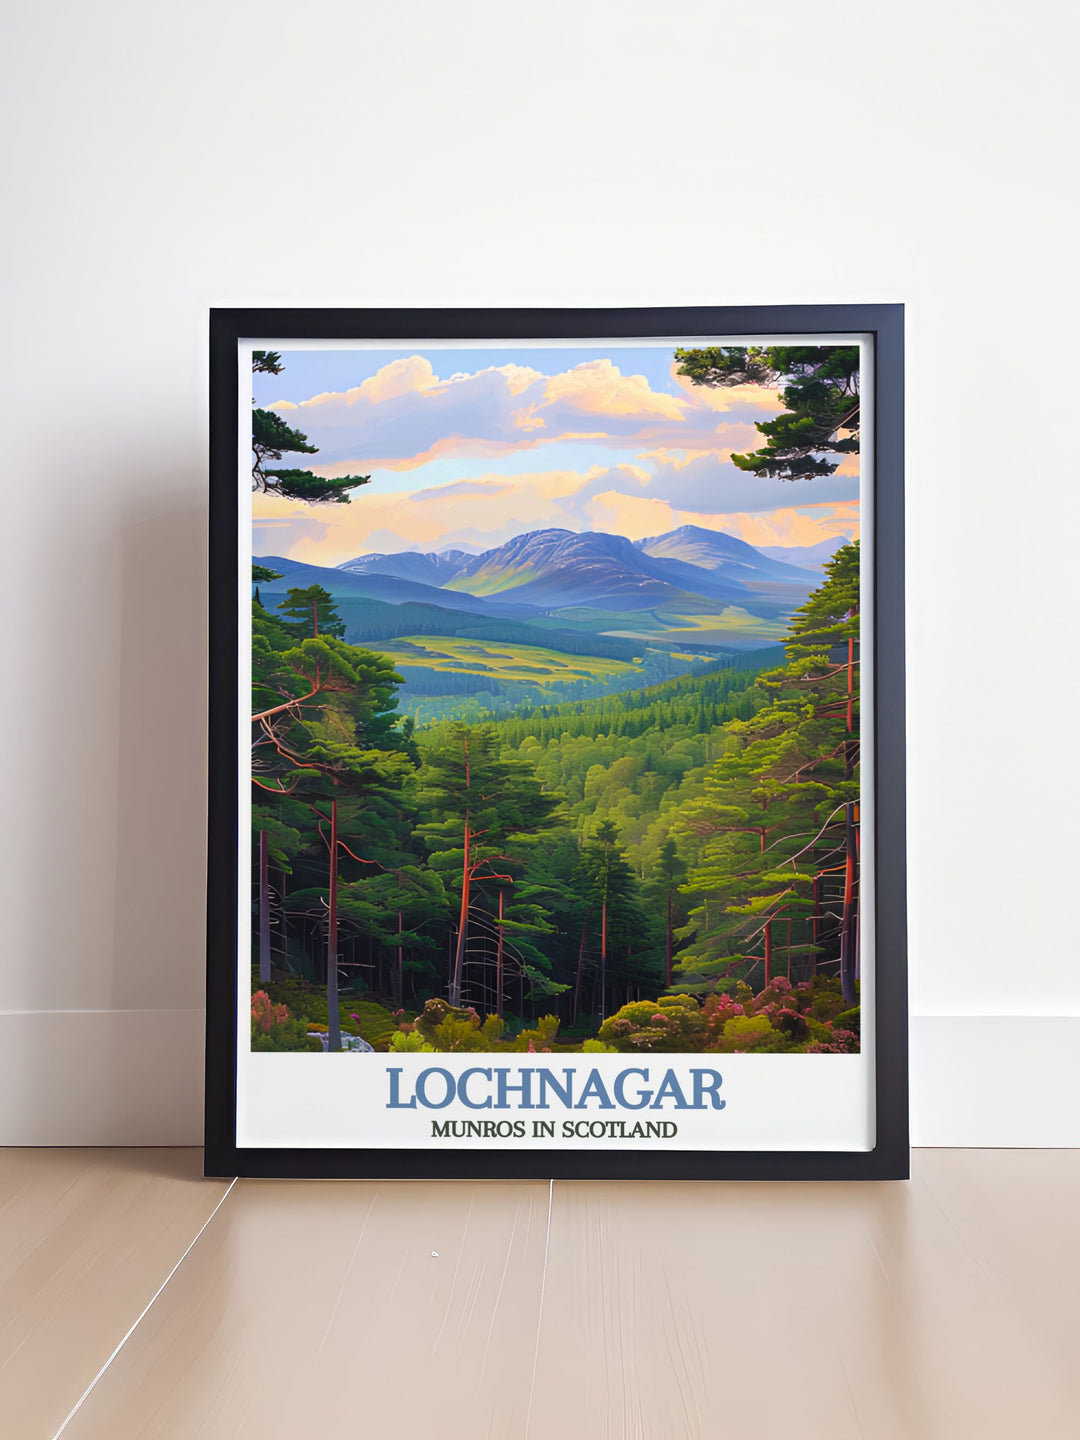 Ballochbuie Forest Wall Art capturing the stunning beauty of the Scottish Highlands with detailed vintage prints of Lochnagar Munro and Beinn Chìochan Munro ideal for adding a touch of wilderness to any living space